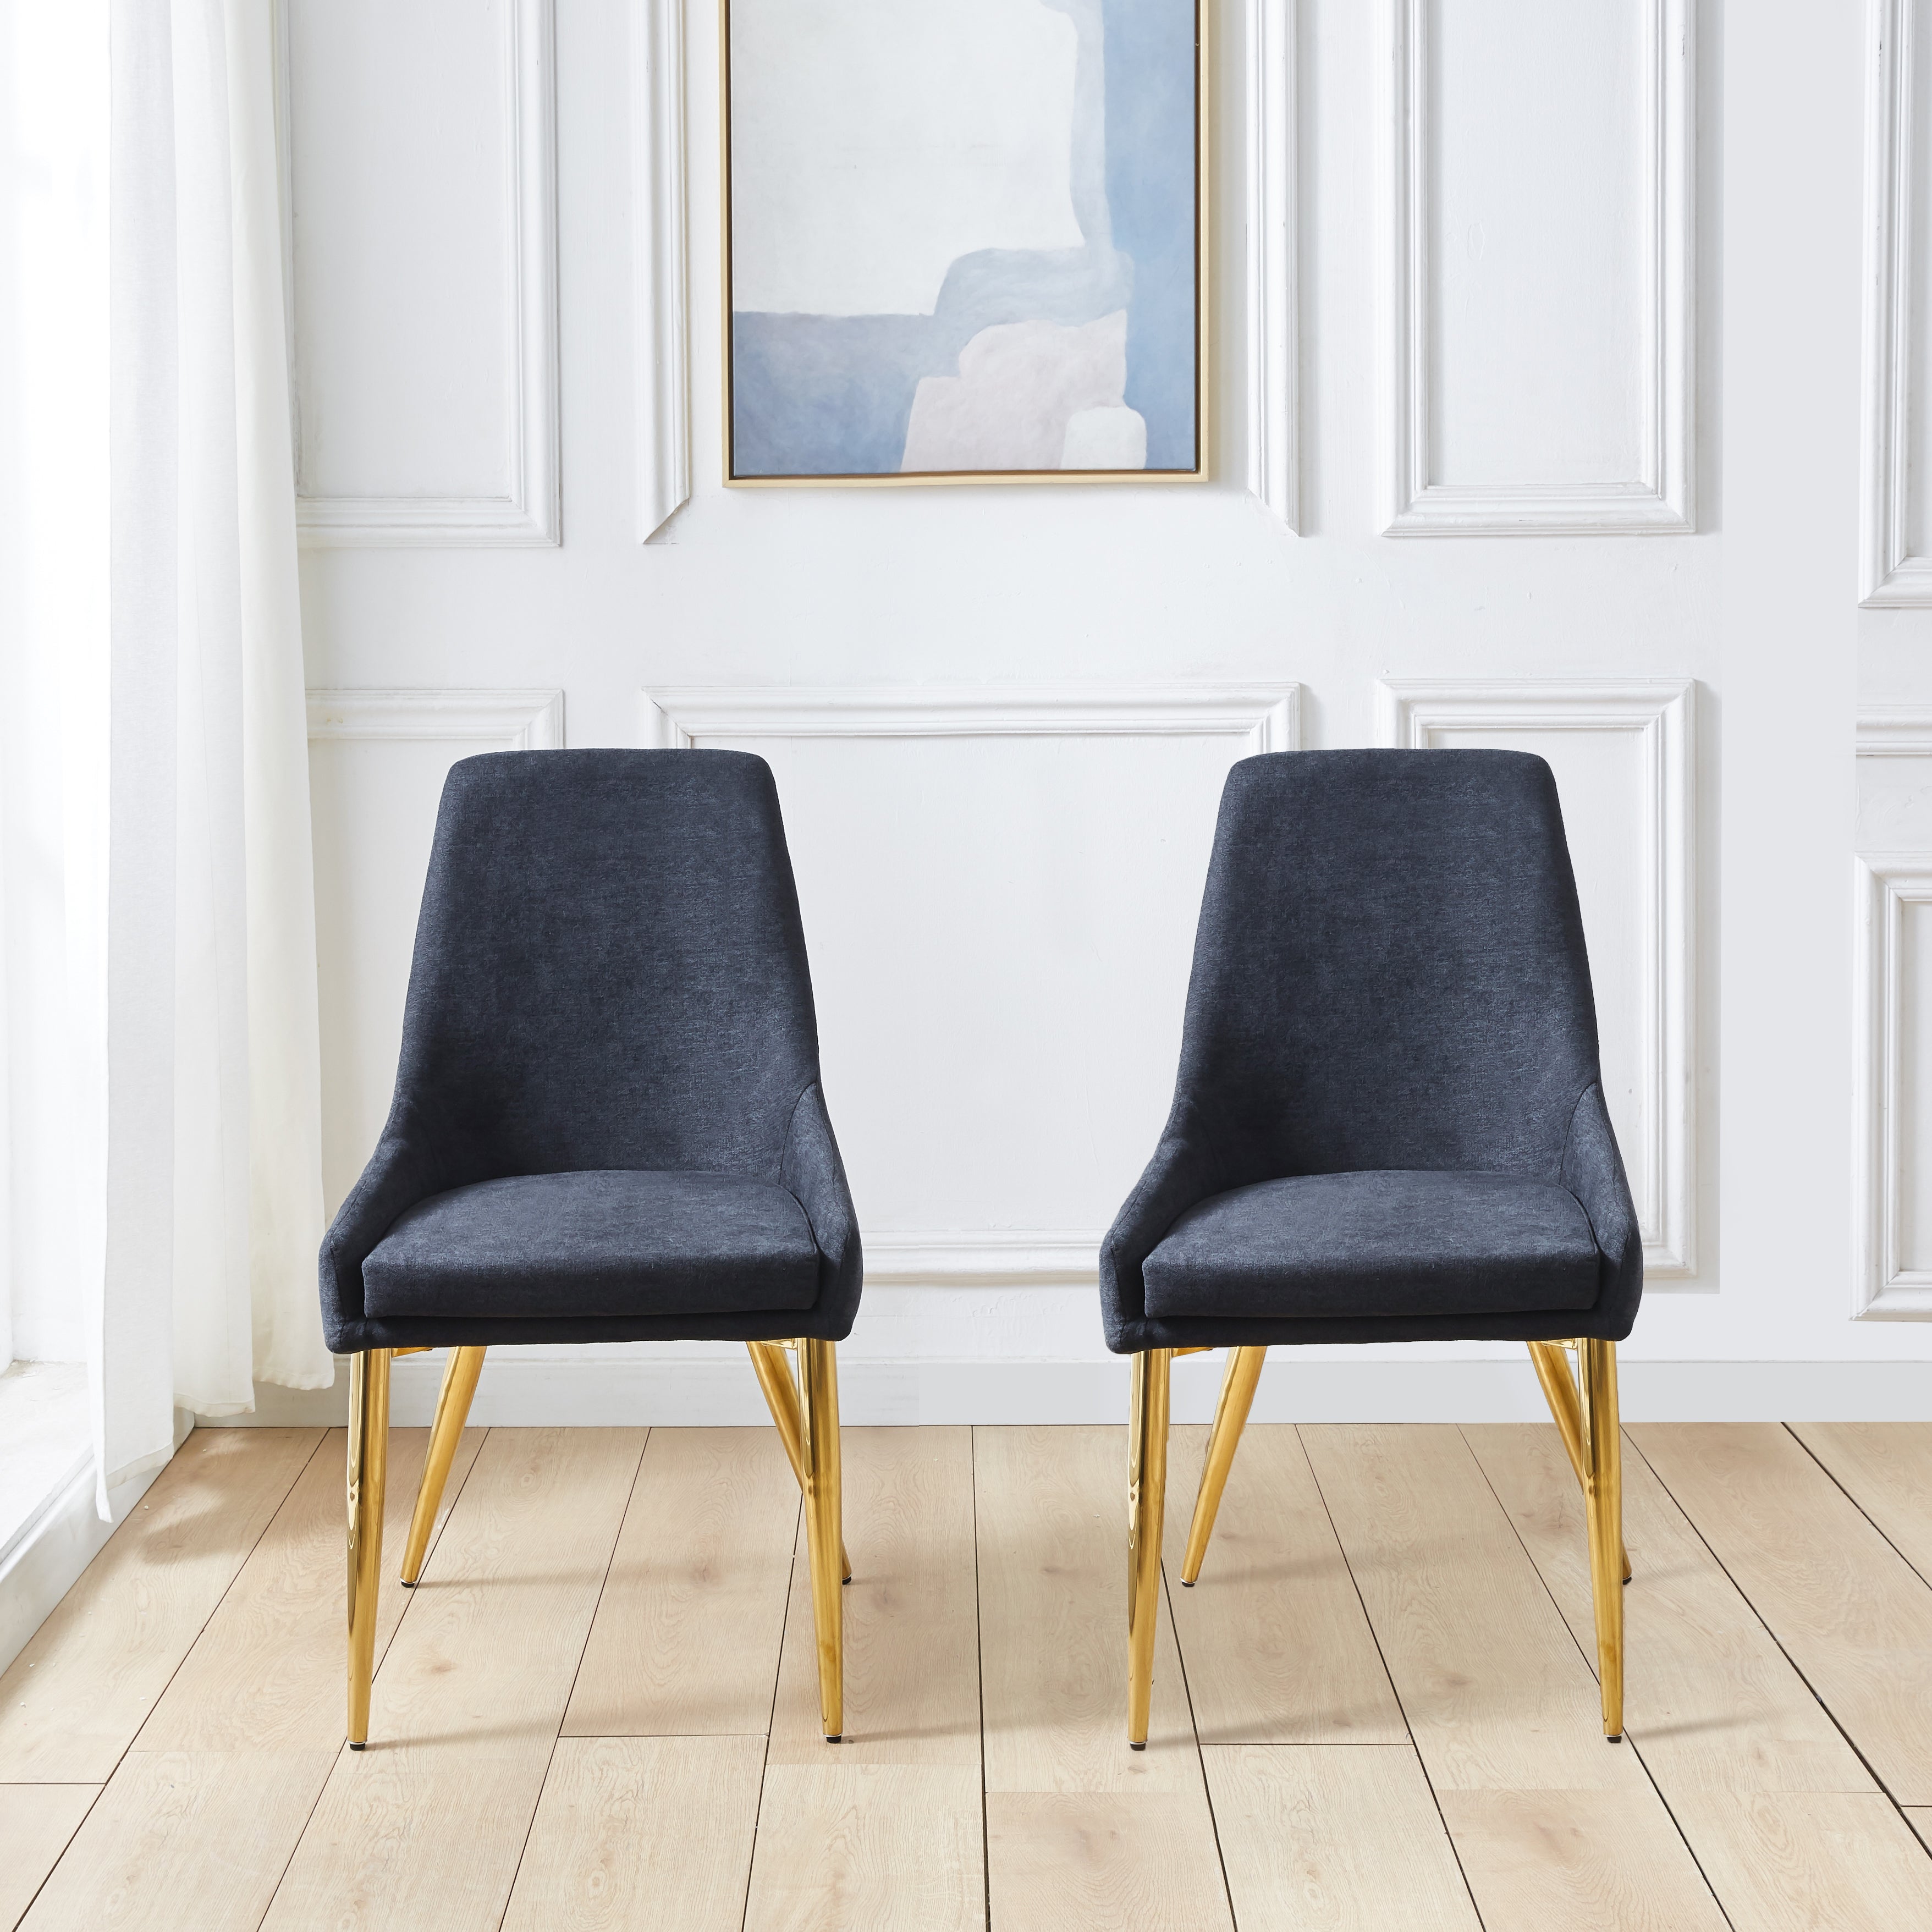 Orren Dining Chairs Black Set of 2